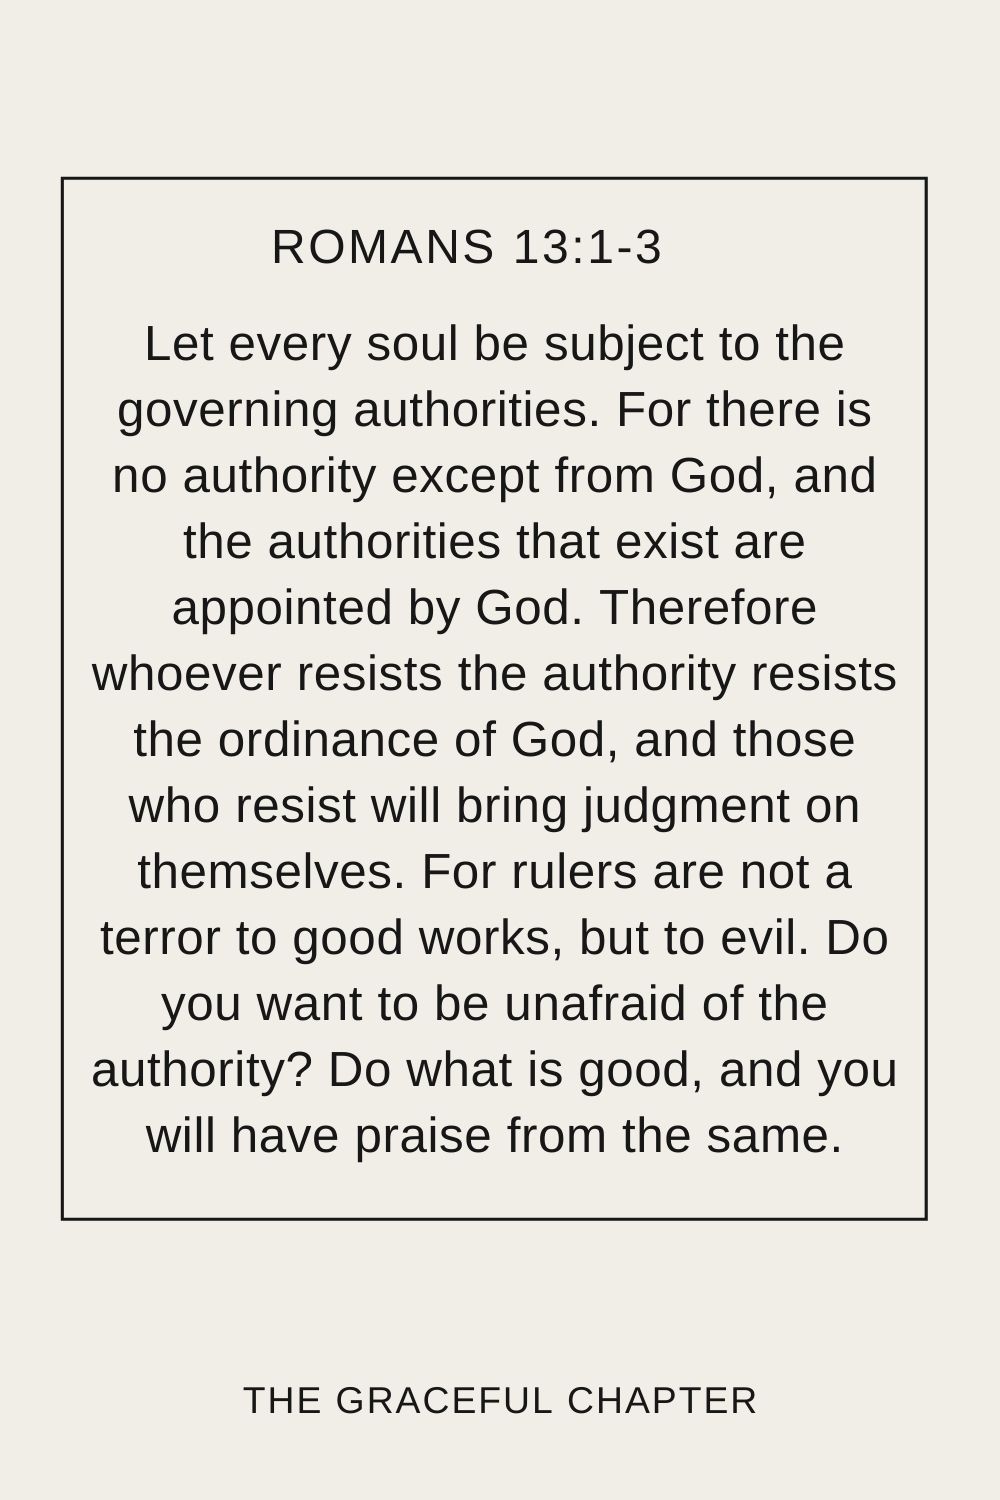 Let every soul be subject to the governing authorities. For there is no authority except from God, and the authorities that exist are appointed by God. Therefore whoever resists the authority resists the ordinance of God, and those who resist will bring judgment on themselves. For rulers are not a terror to good works, but to evil. Do you want to be unafraid of the authority? Do what is good, and you will have praise from the same. Romans 13:1-3